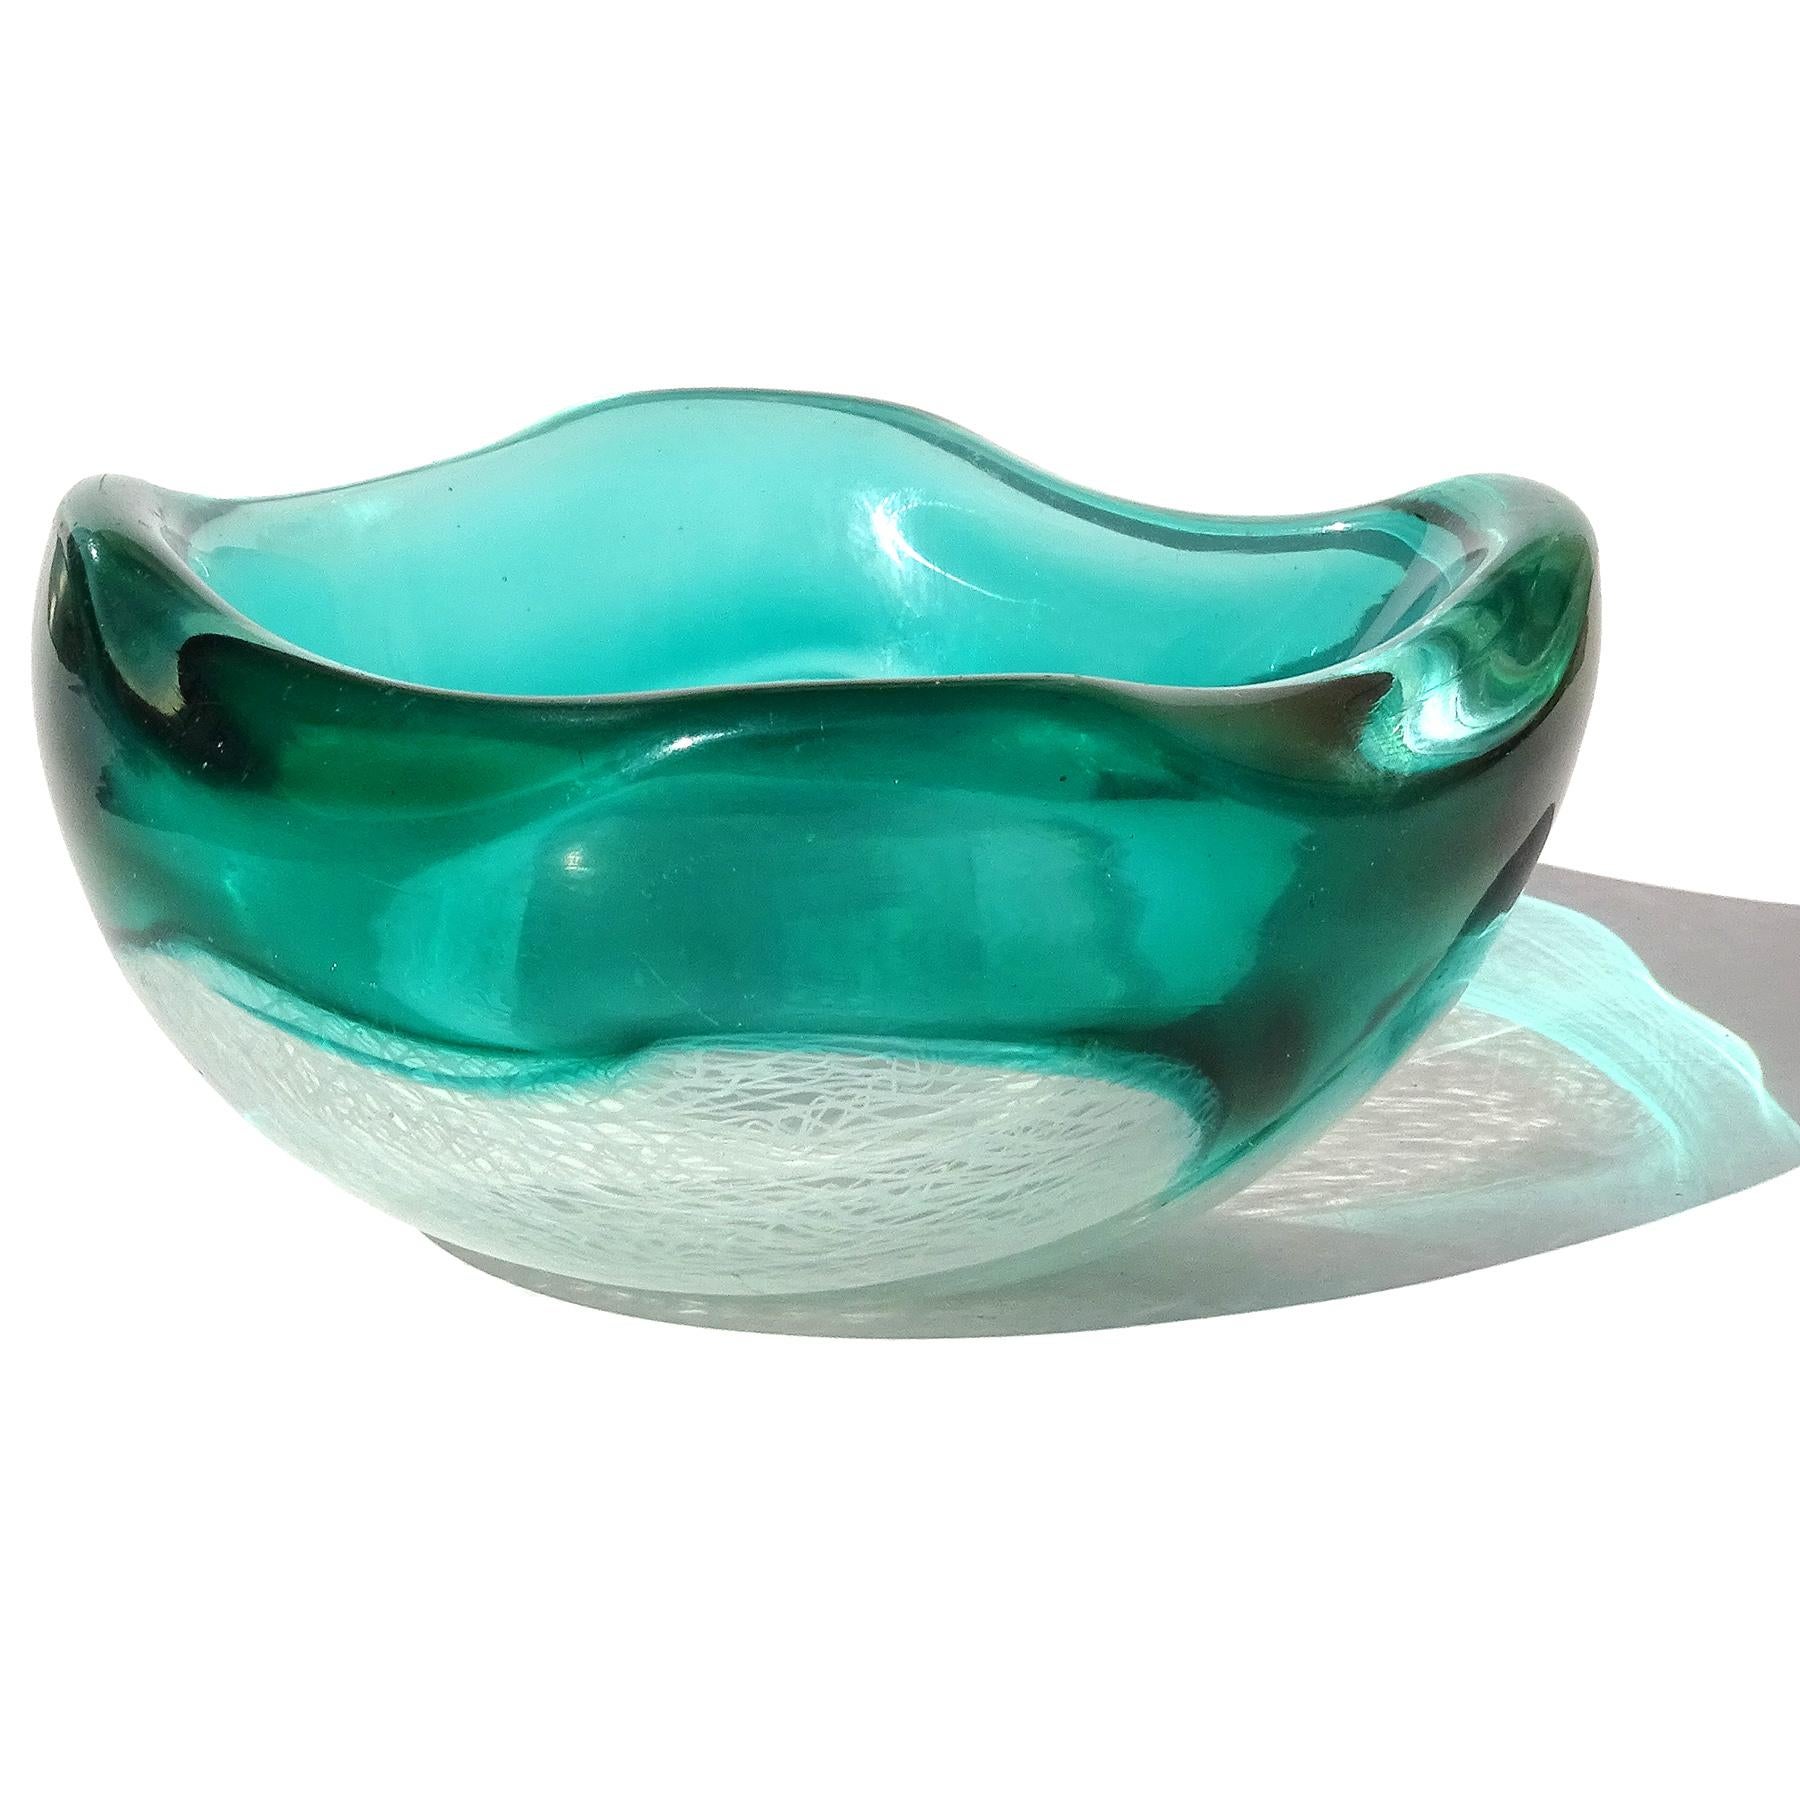 Beautiful and rare, vintage Murano hand blown green and white ribbons Italian art glass decorative bowl, vide-poche. The bowl is documented to designer Archimede Seguso, circa 1952. Created in the 